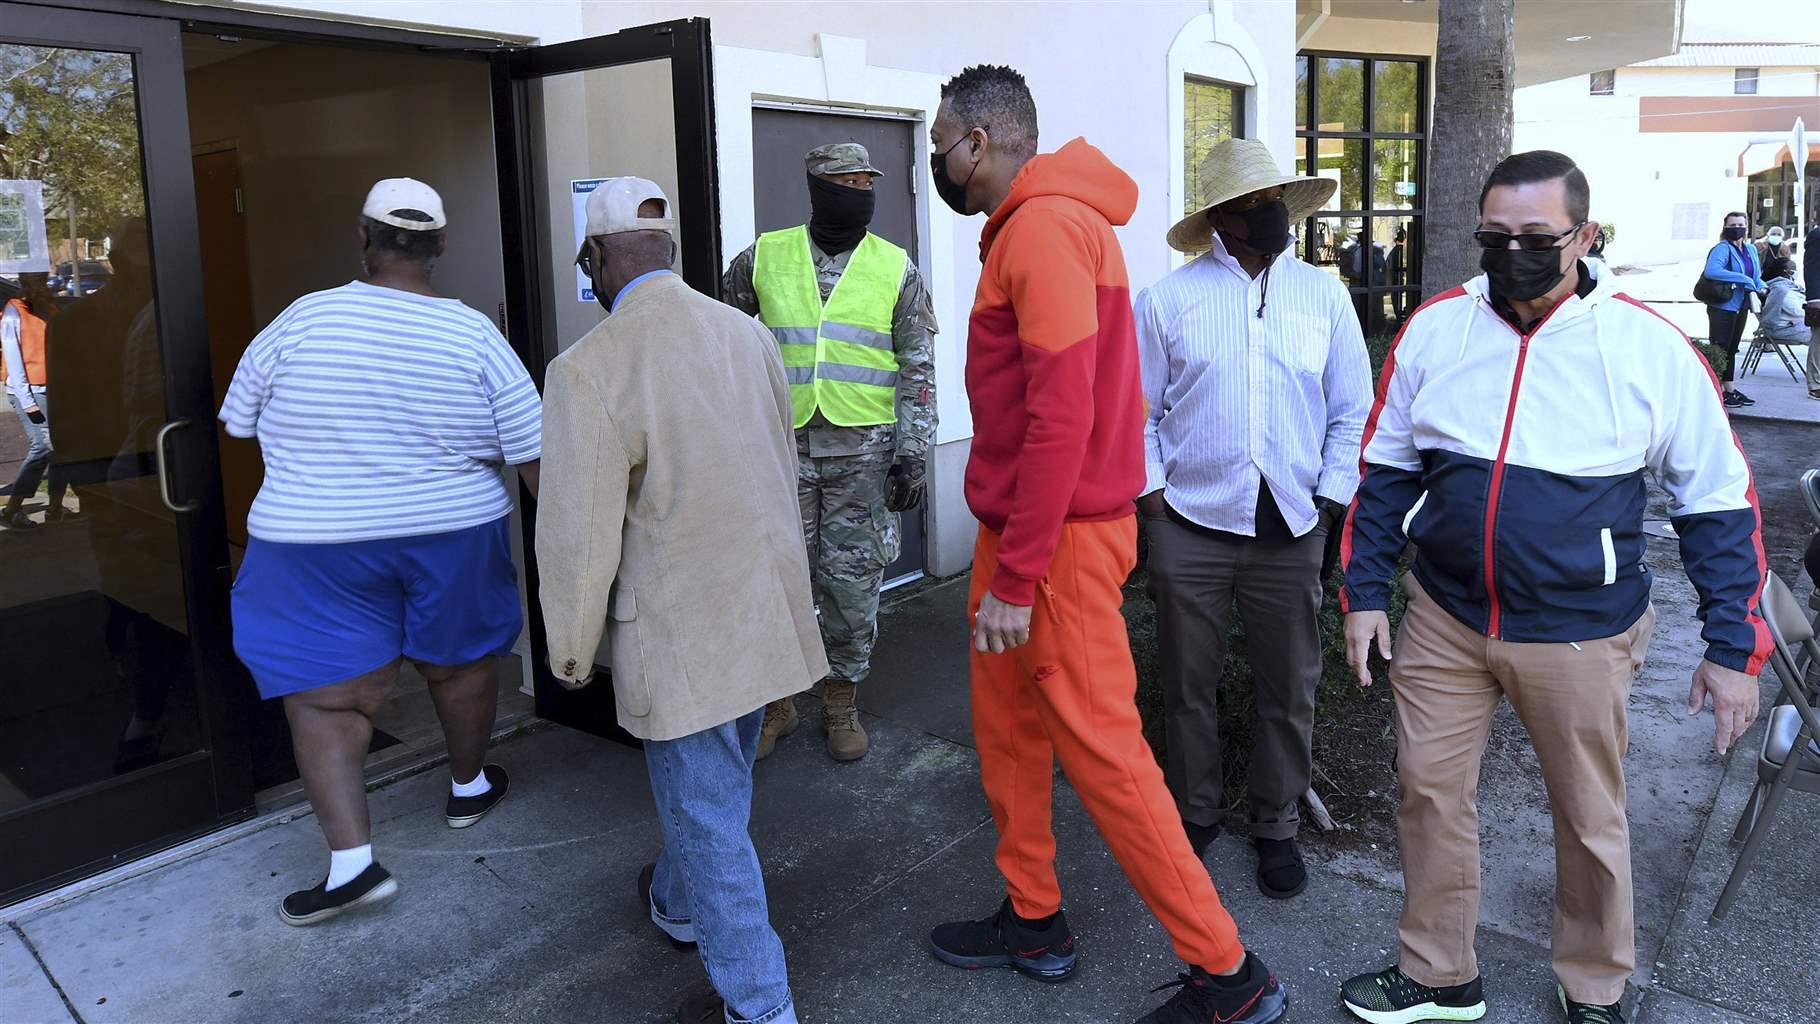 People enter Shiloh Baptist Church to receive a dose of the Pfizer COVID-19 vaccine on March 7, 2021 in Orlando, Florida. 